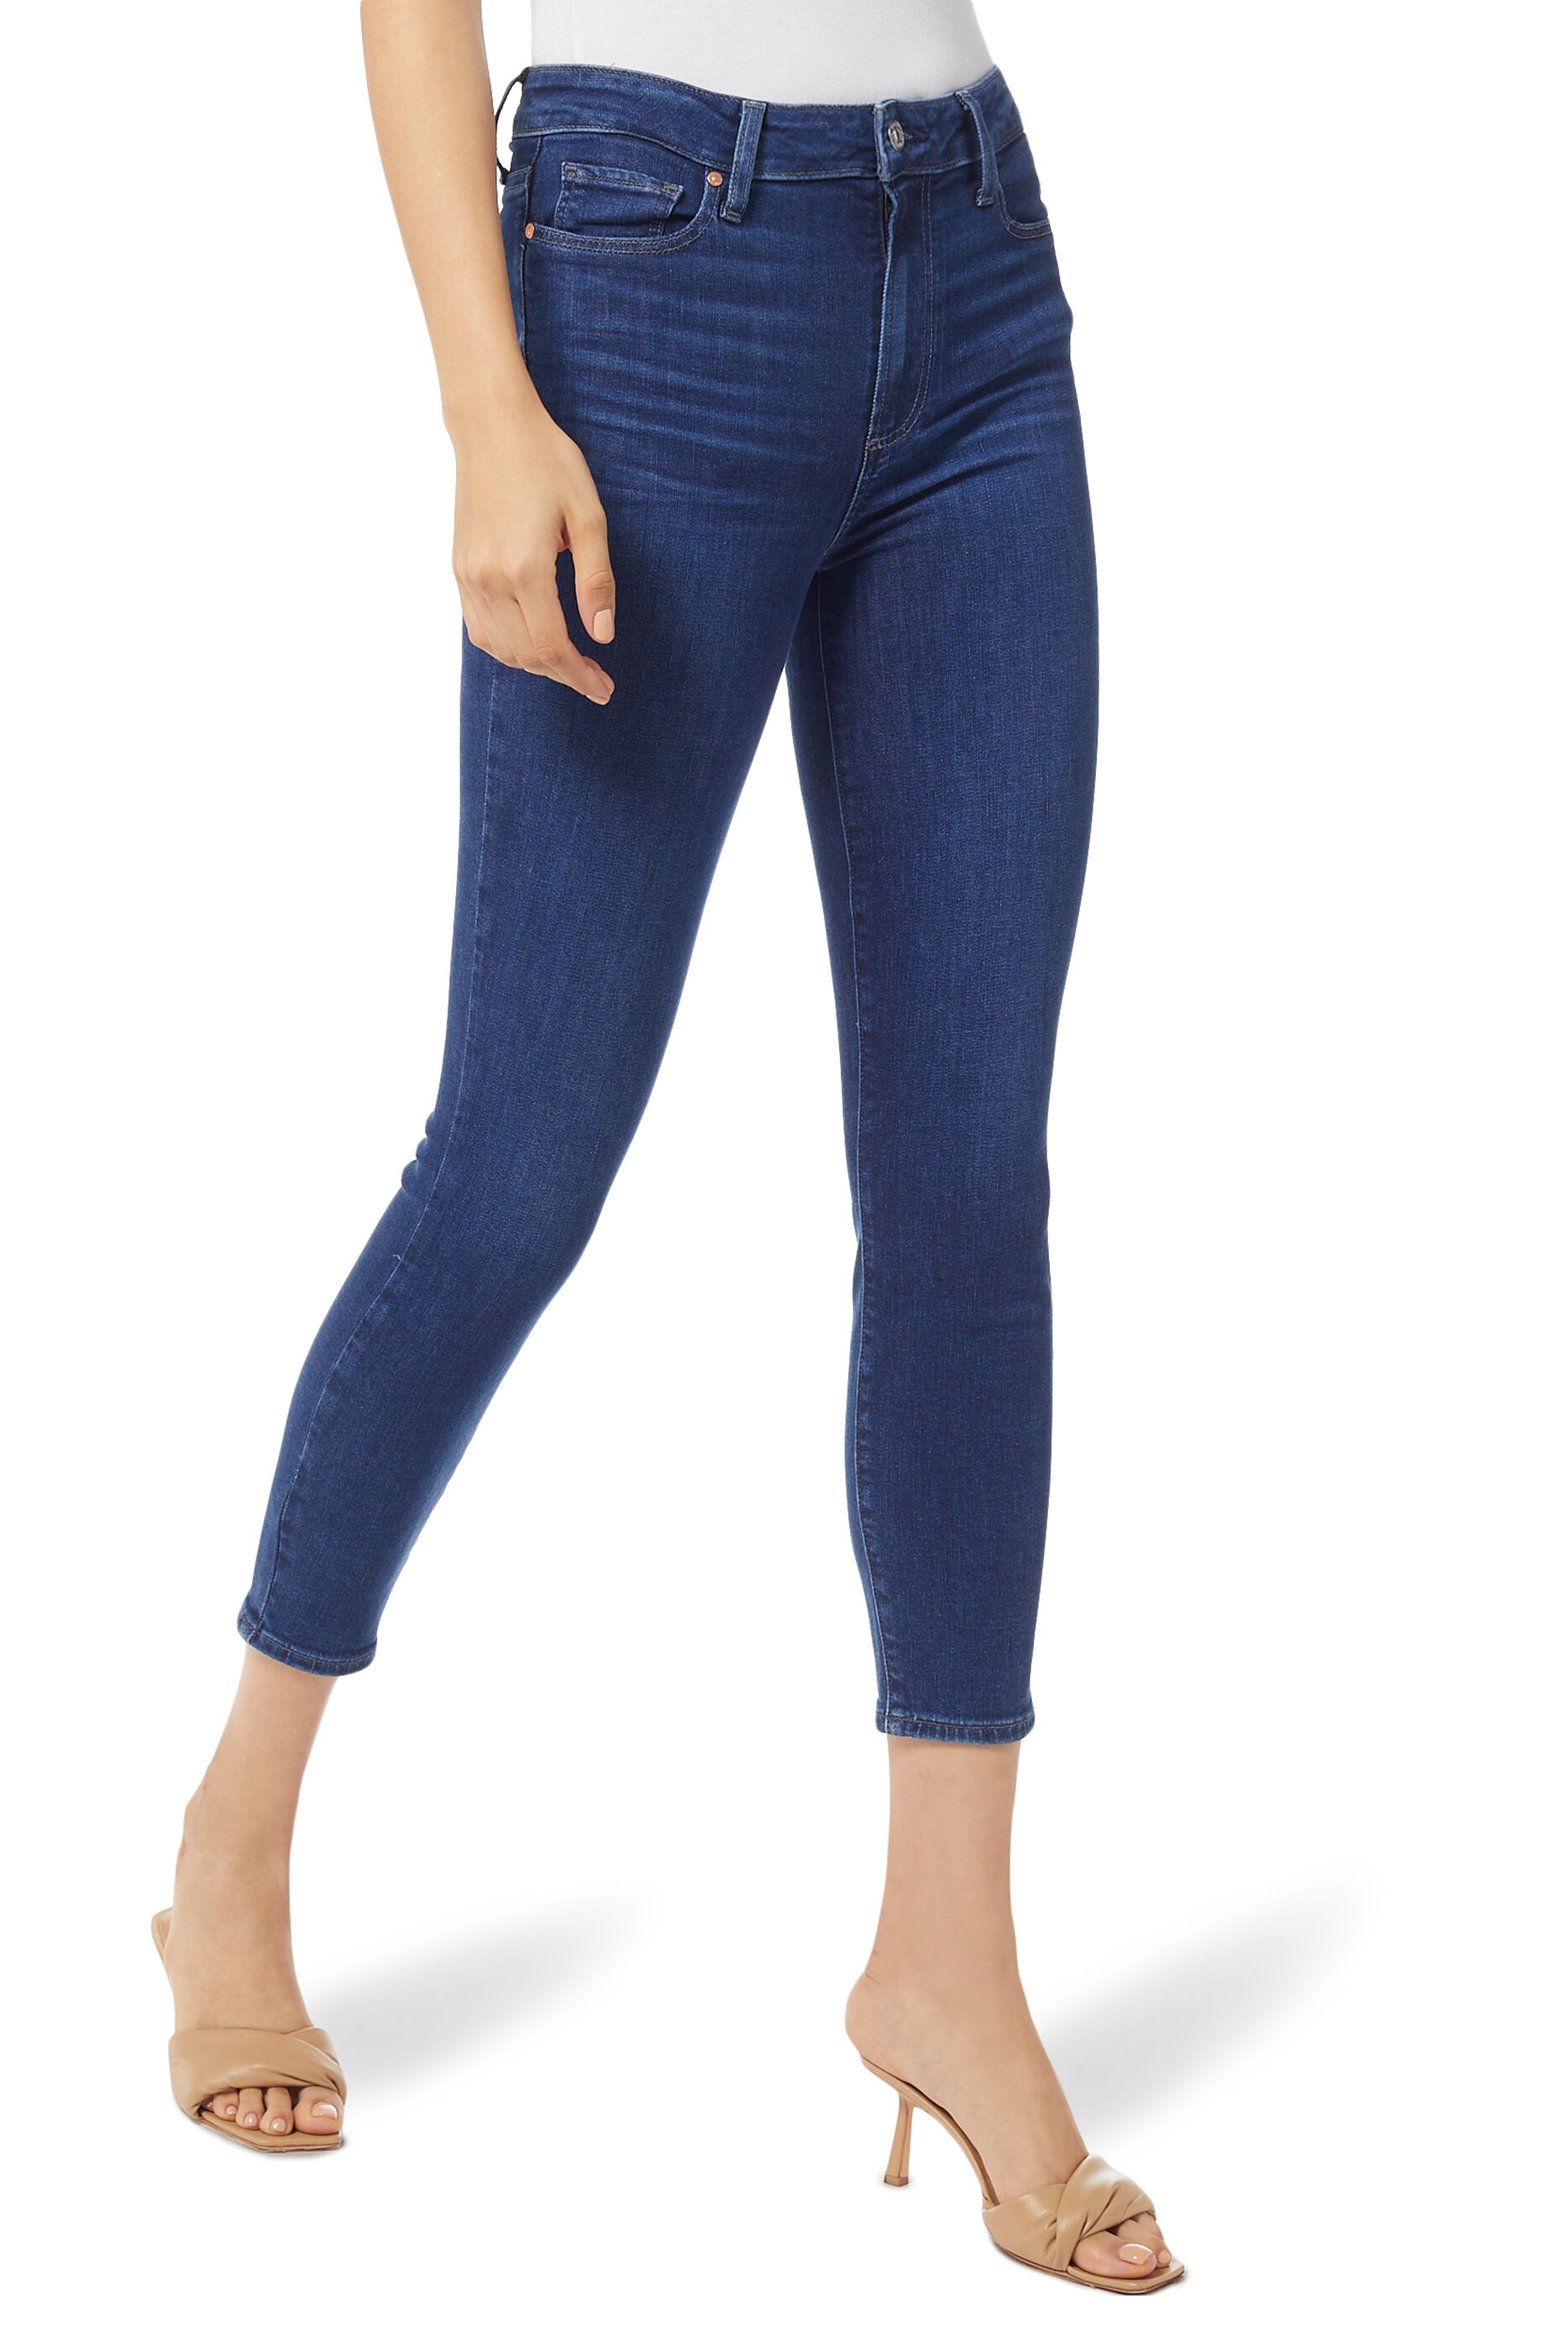 Buy Paige Hoxton Cropped Skinny Jeans 